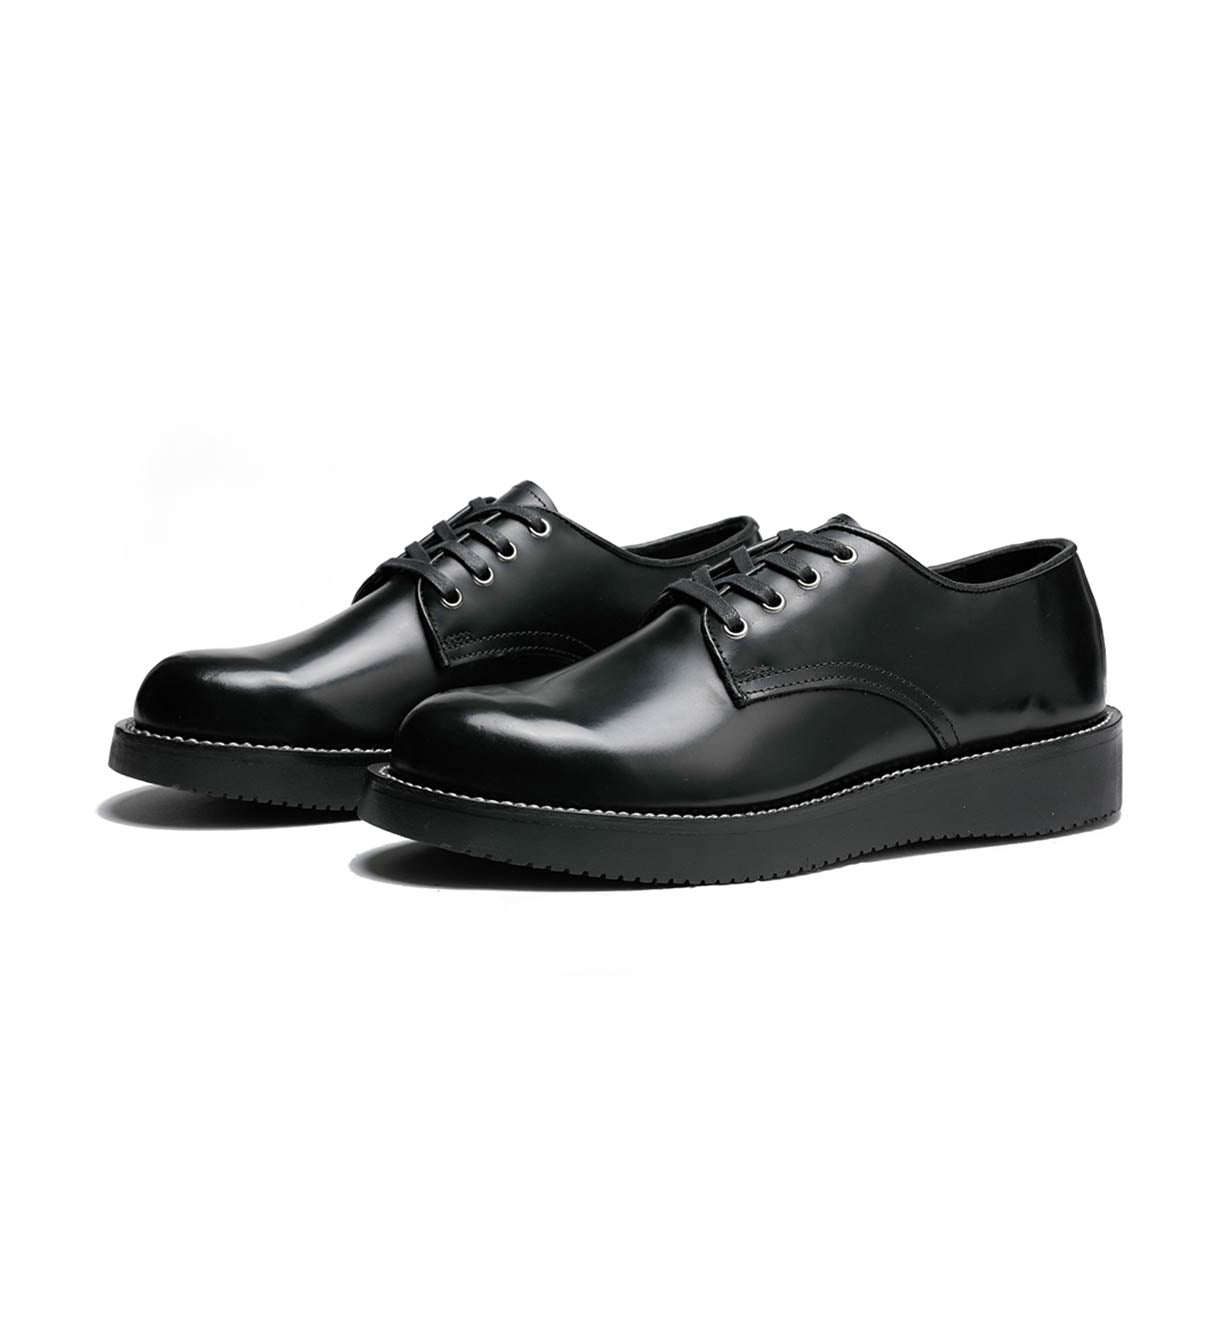 A pair of black Michael derby shoes by Broken Homme with leather uppers and a vibram wedge outsole on a white background.